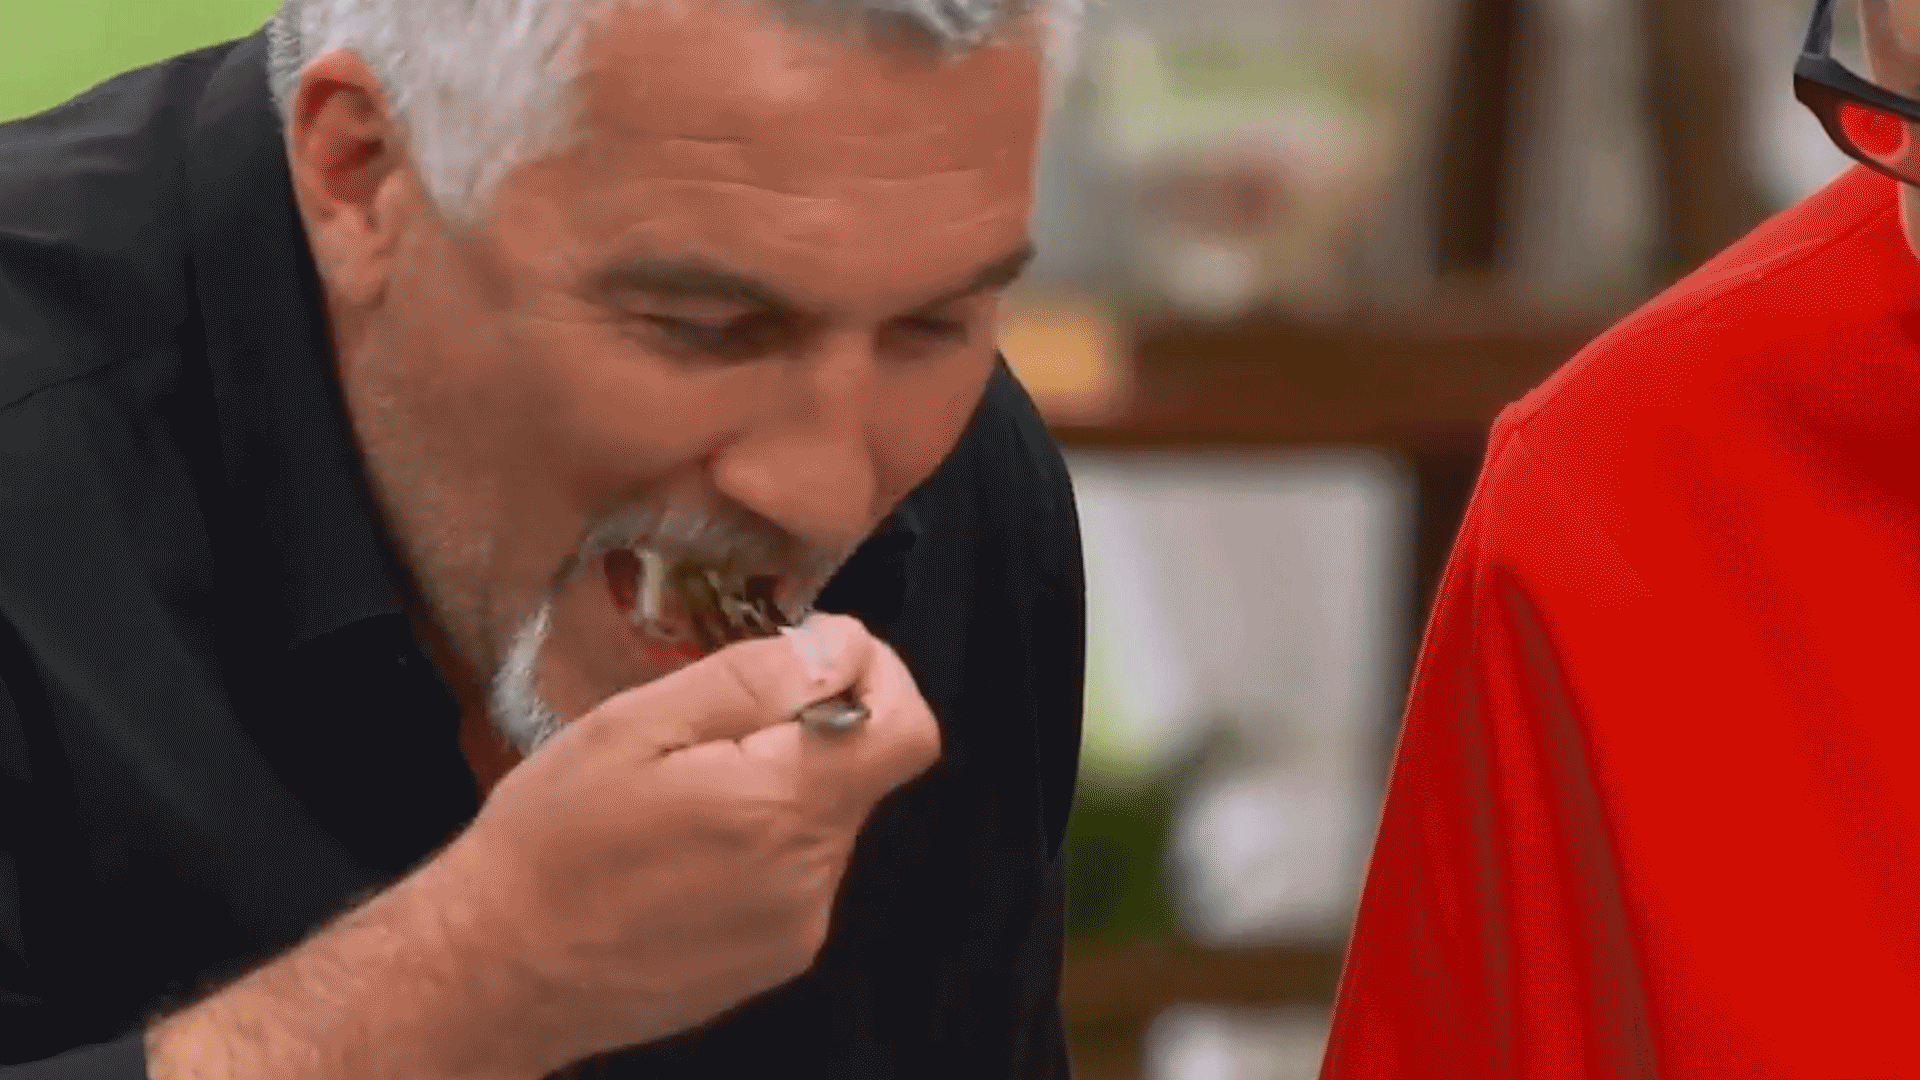 Paul Hollywood in Great British Bake Off